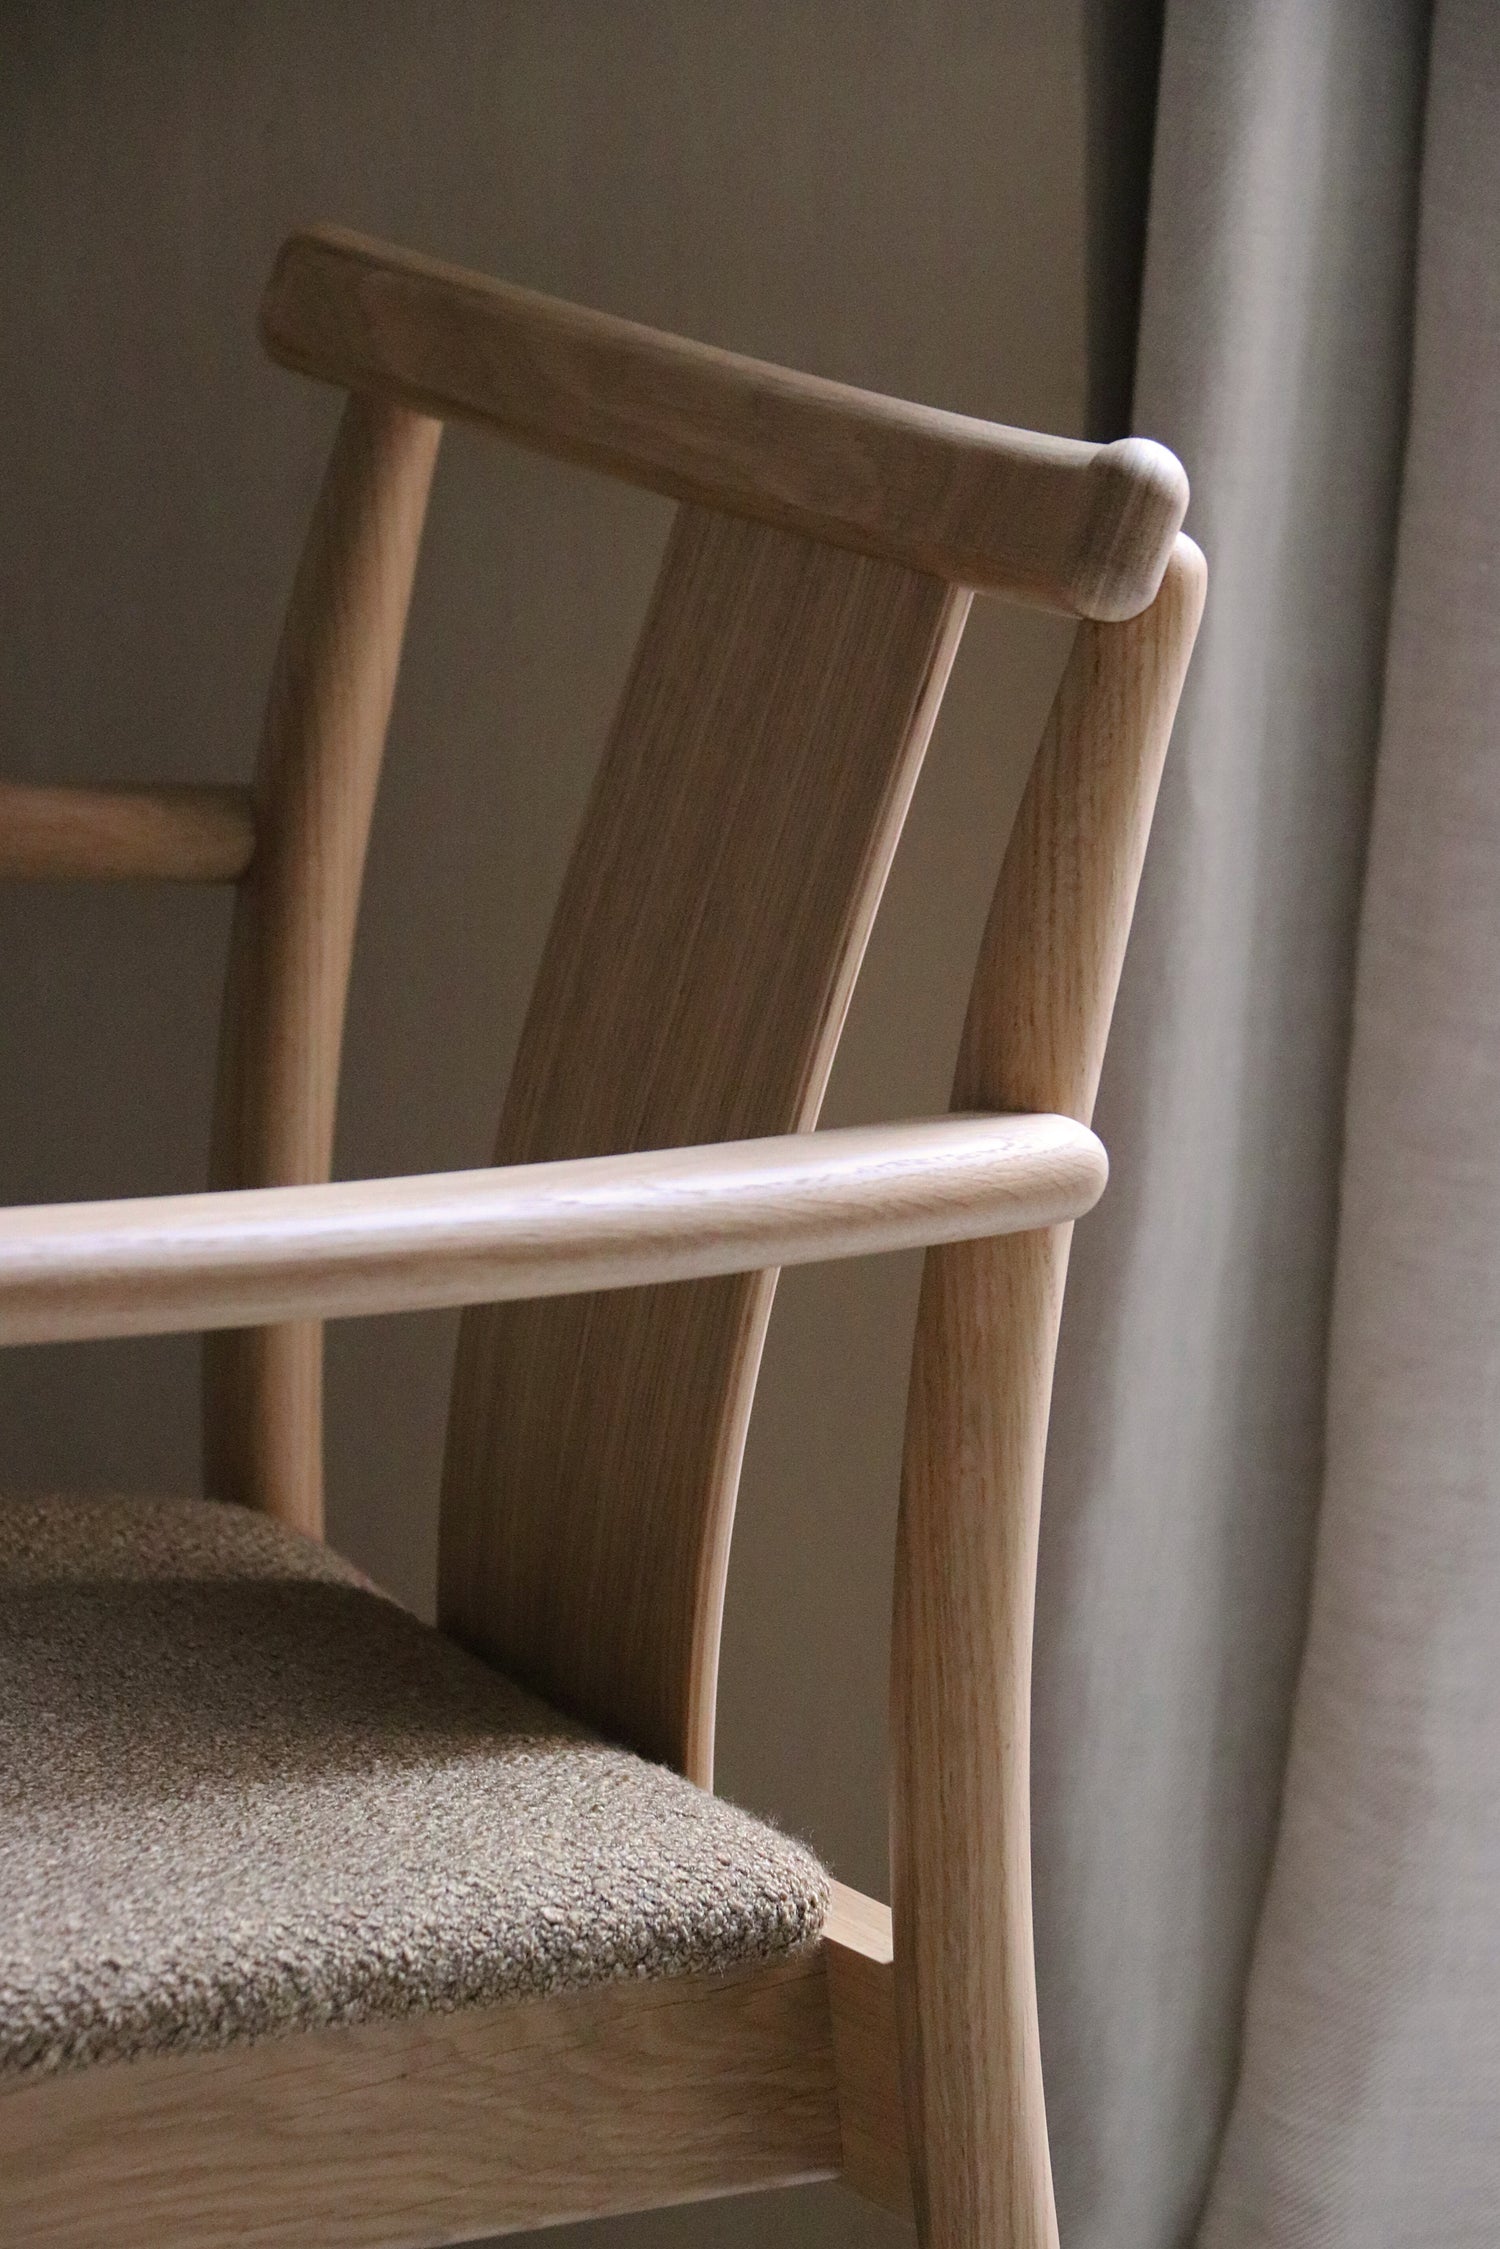 A close up of the Merkur Dining Chair with upholstery Hallingdal 65 200, by Audo Copenhagen.